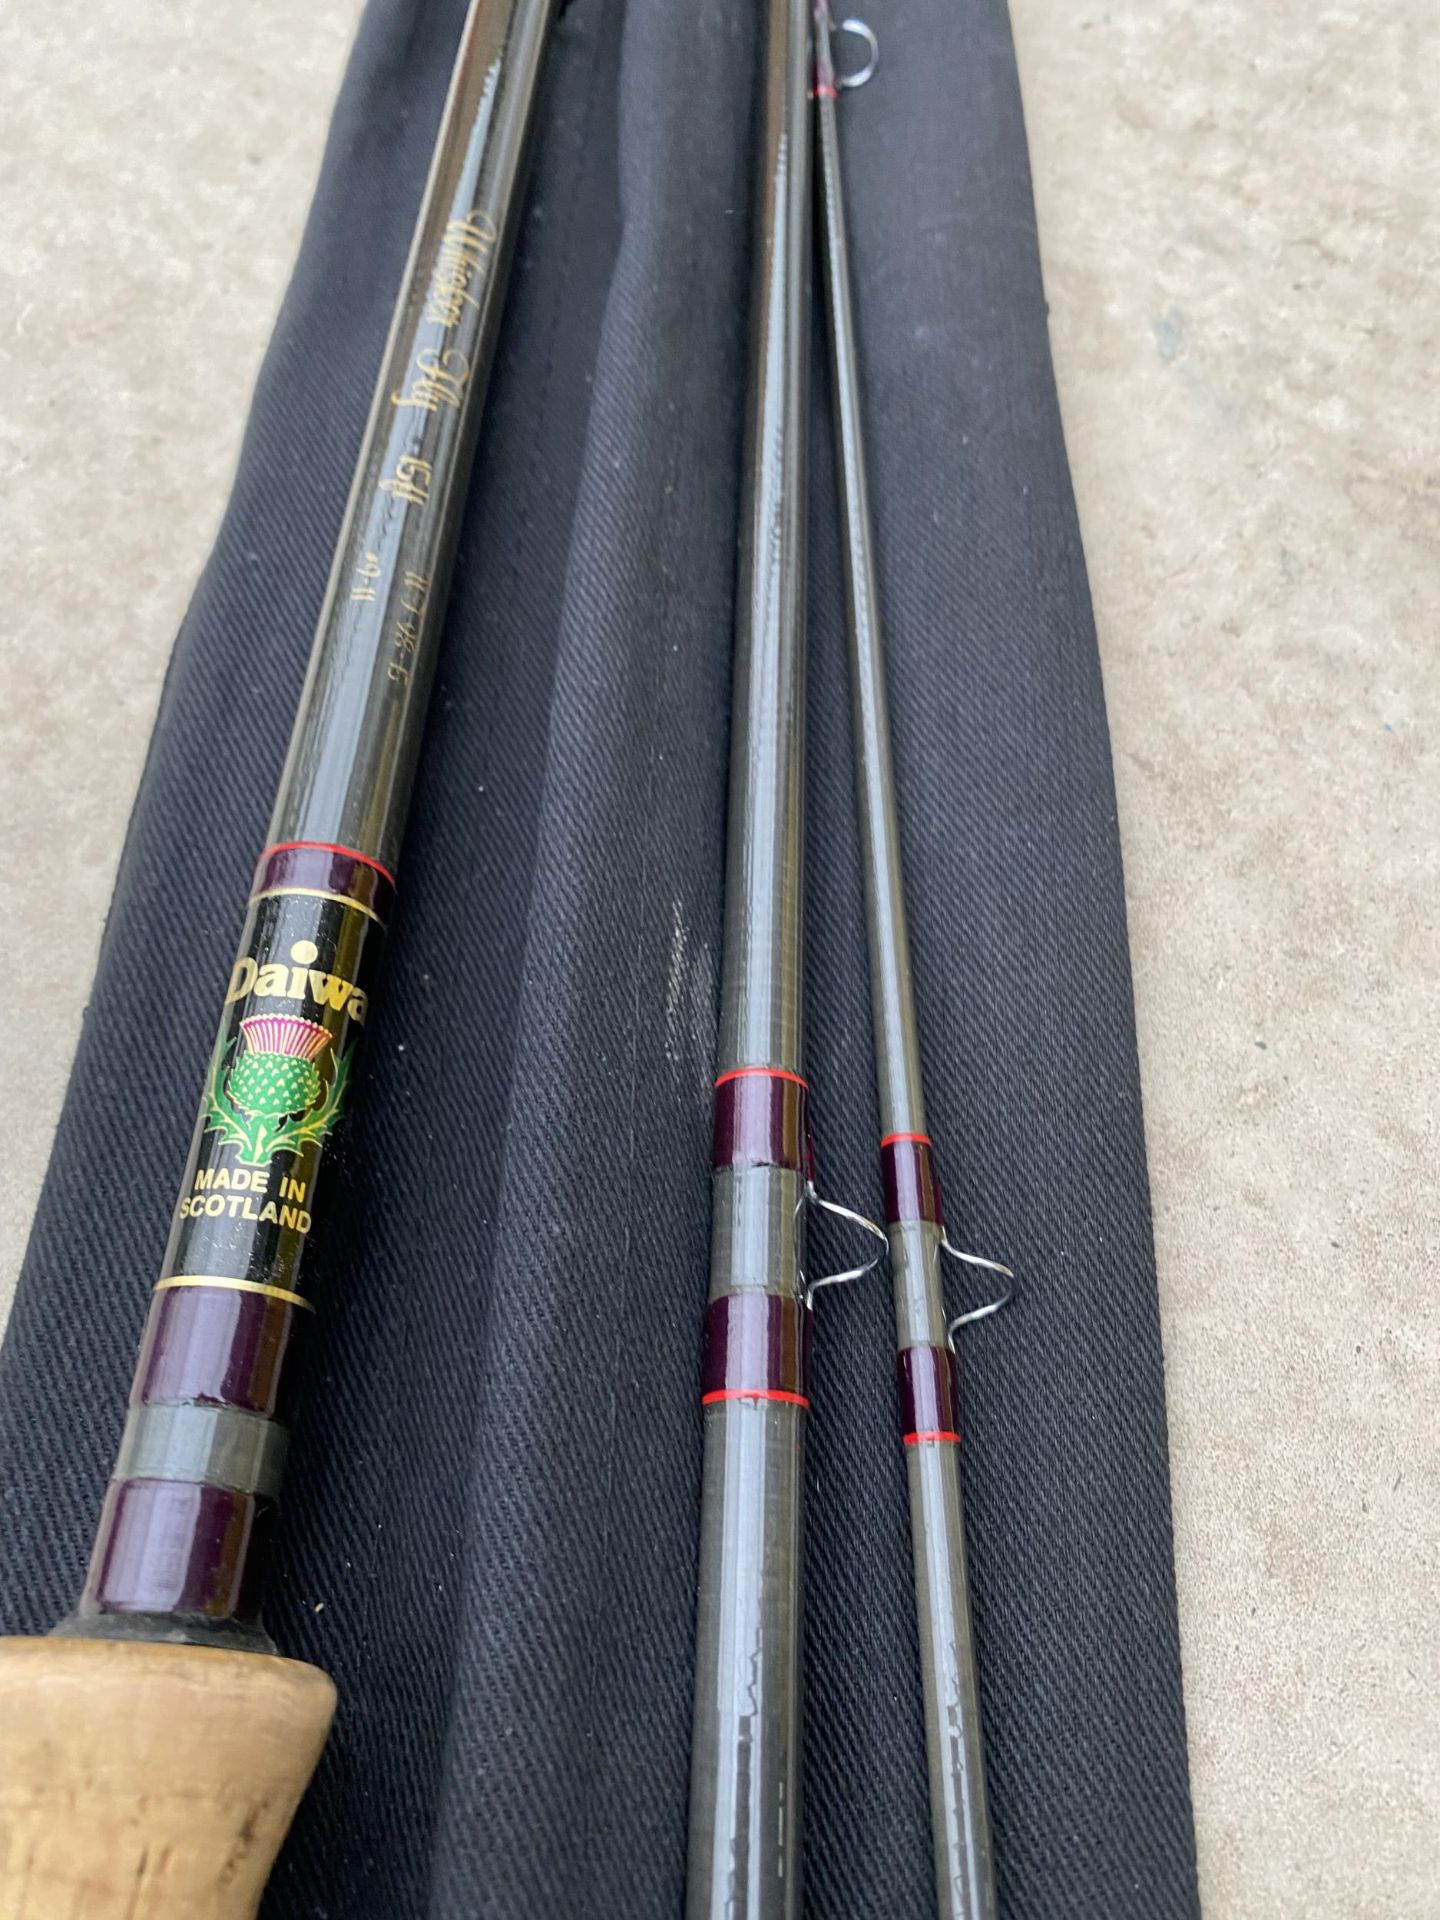 A DAIWA WHISKER 15FT #9/11 FLY FISHING SALMON AND SEA TROUT XTC LURE ROD - Image 3 of 3